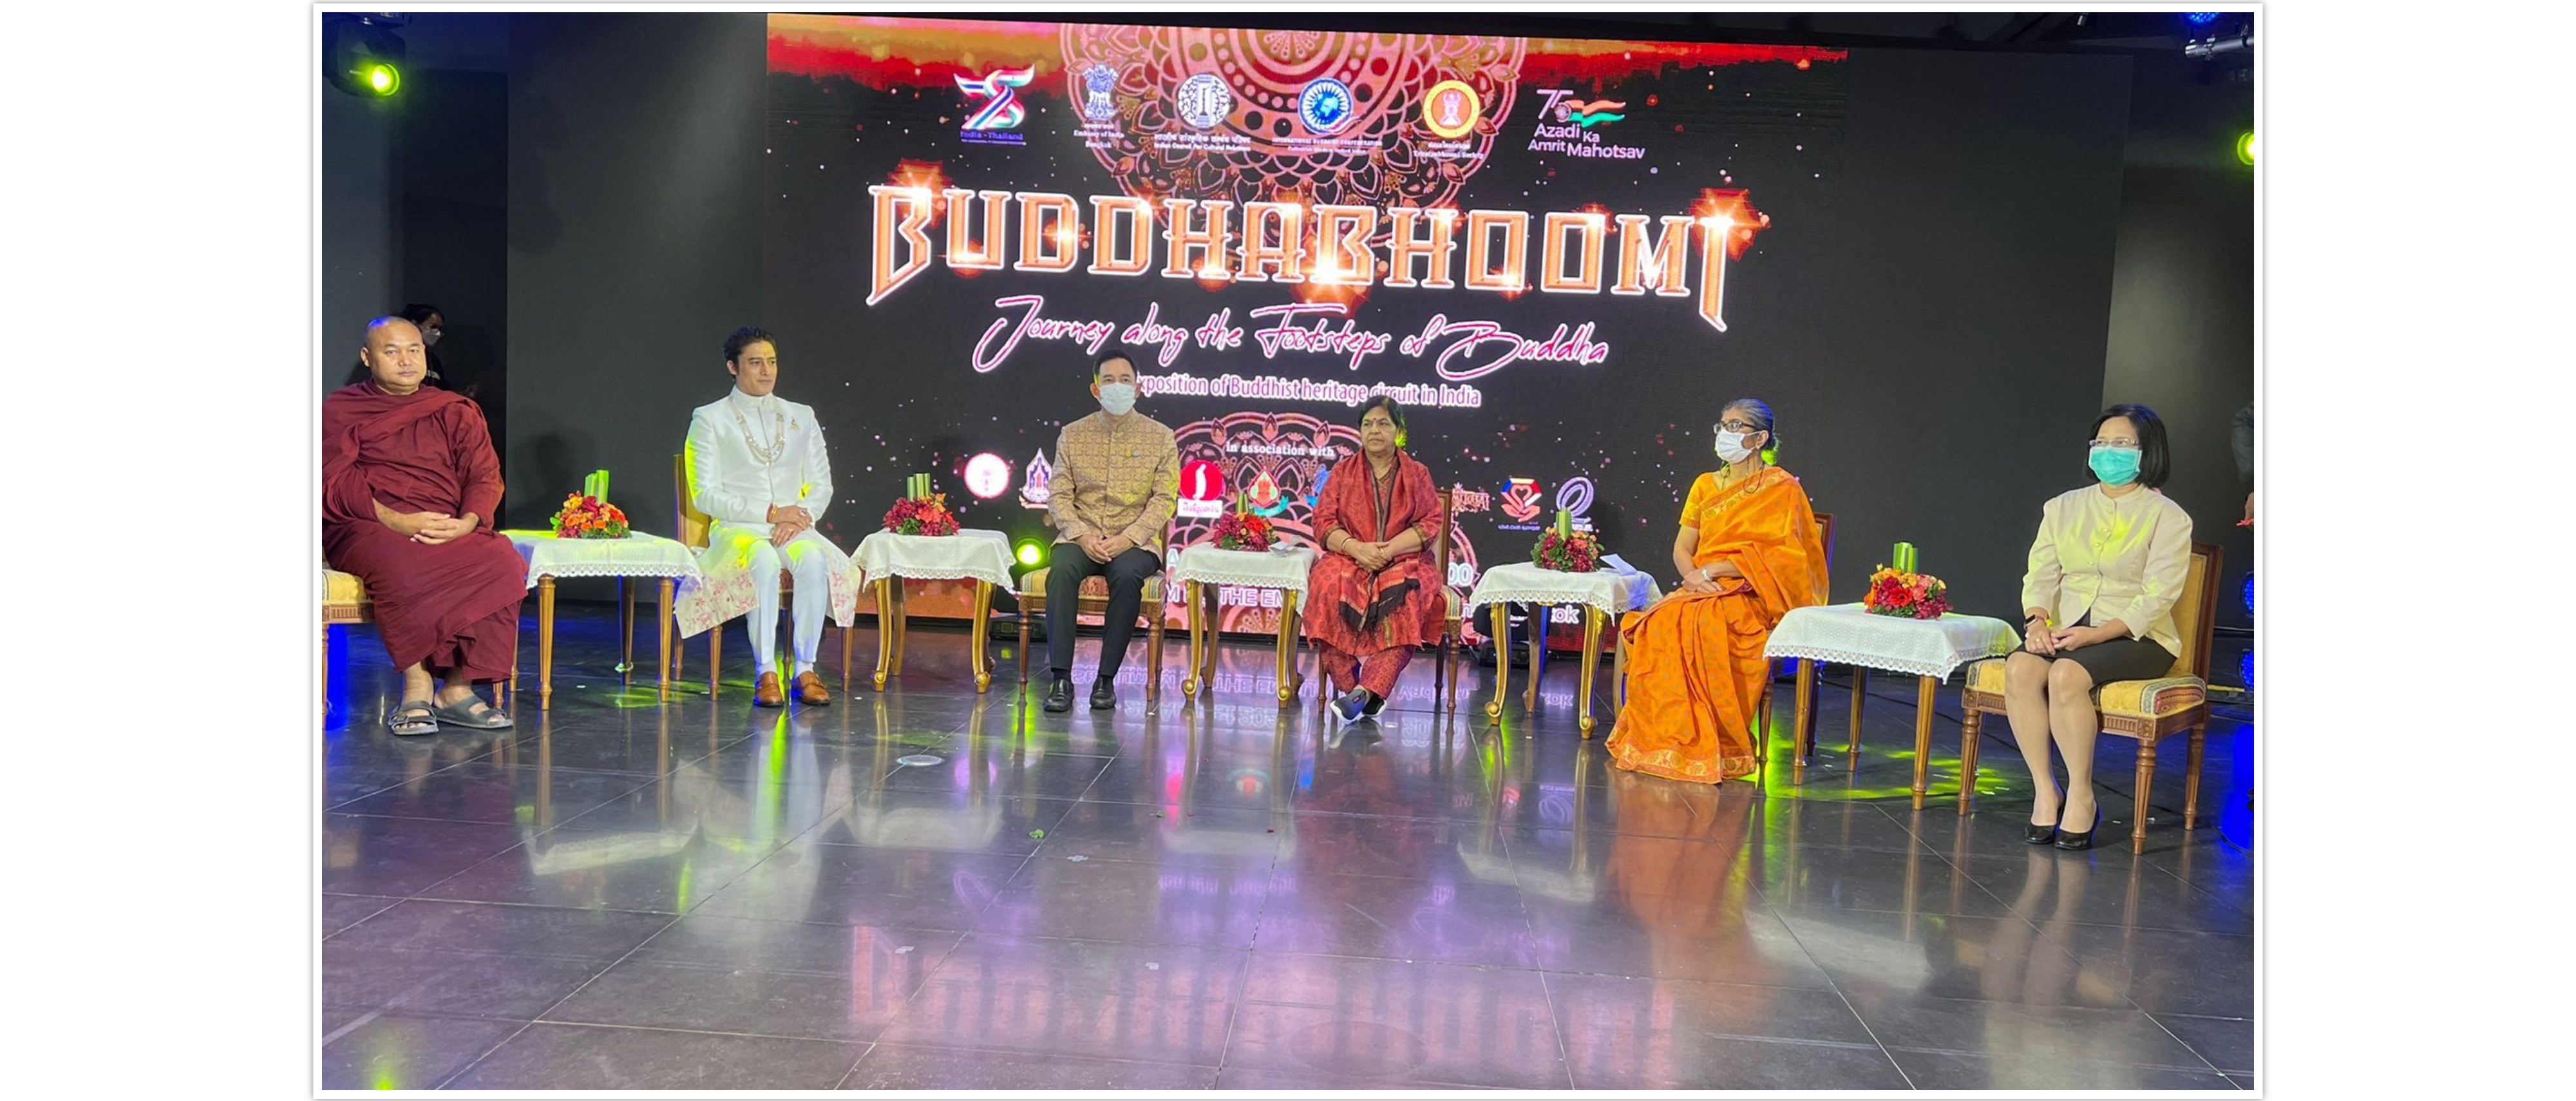  Inaugural ceremony of Buddhabhoomi: Journey along the Footsteps of Buddha – 26 August 2022